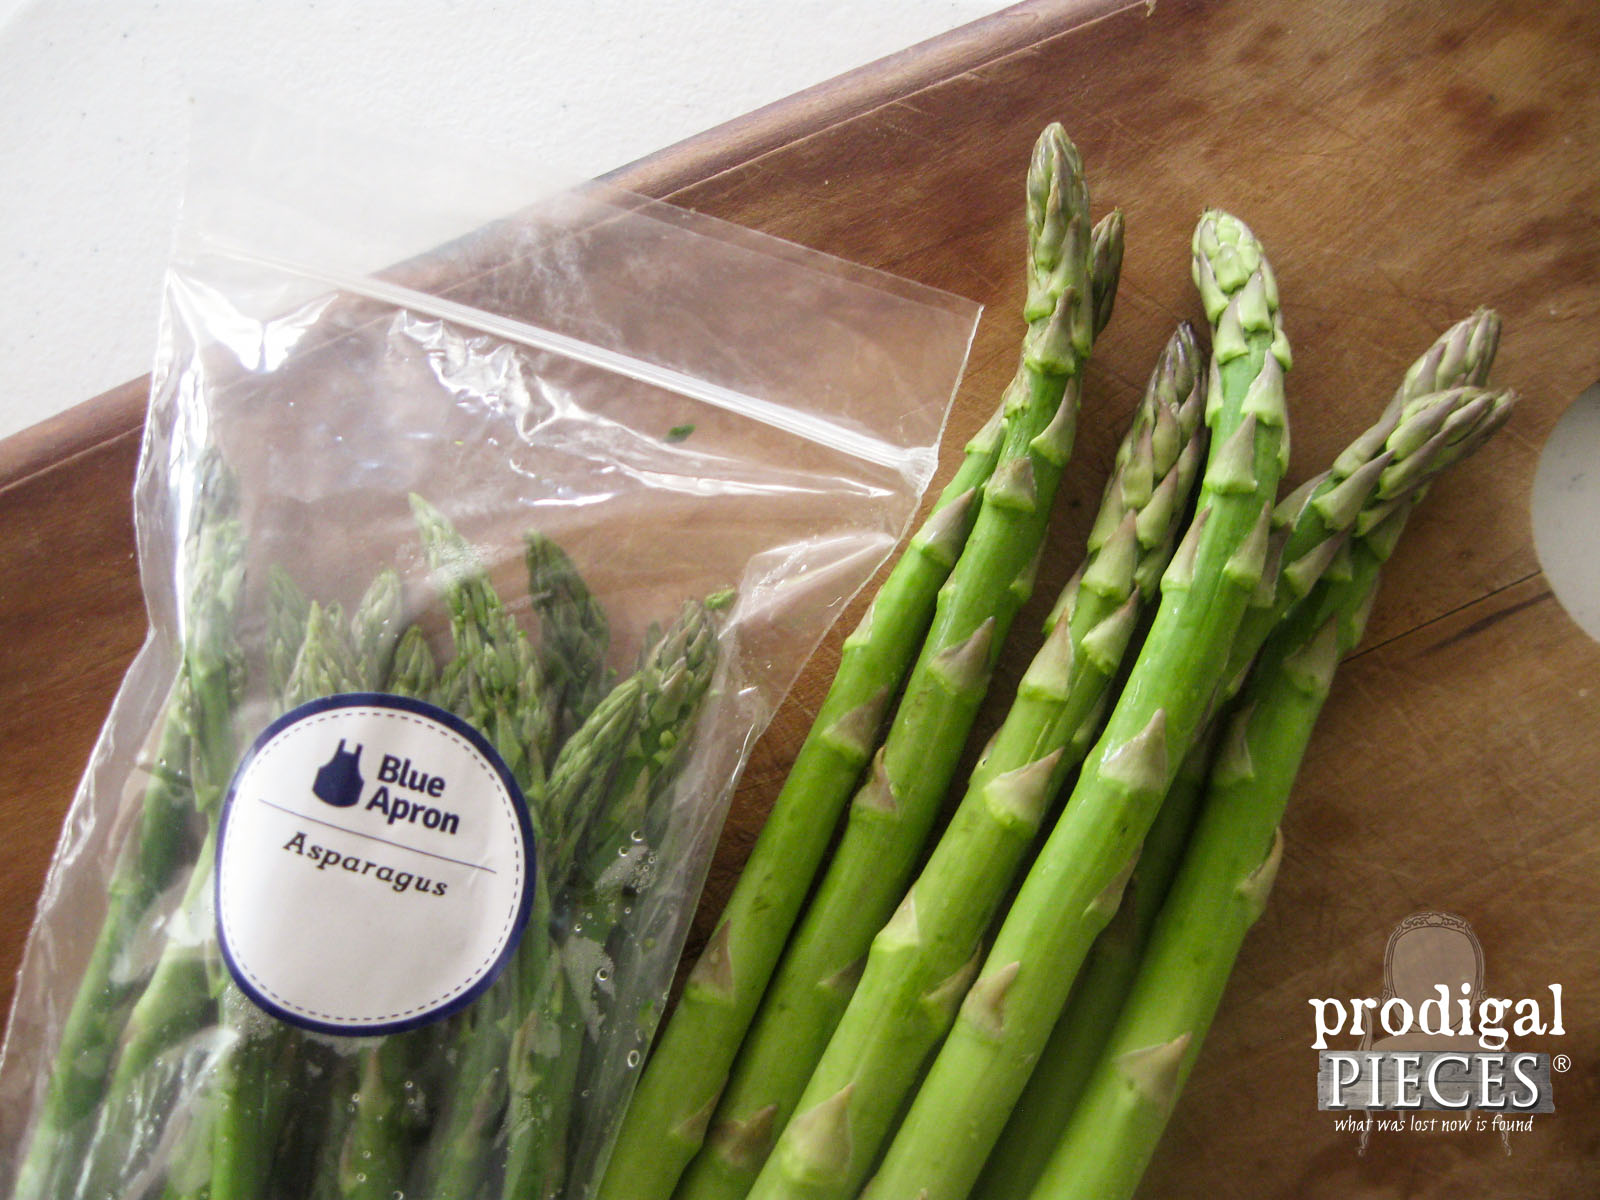 Freshly Packaged Asparagus from Blue Apron | Prodigal Pieces | www.prodigalpieces.com